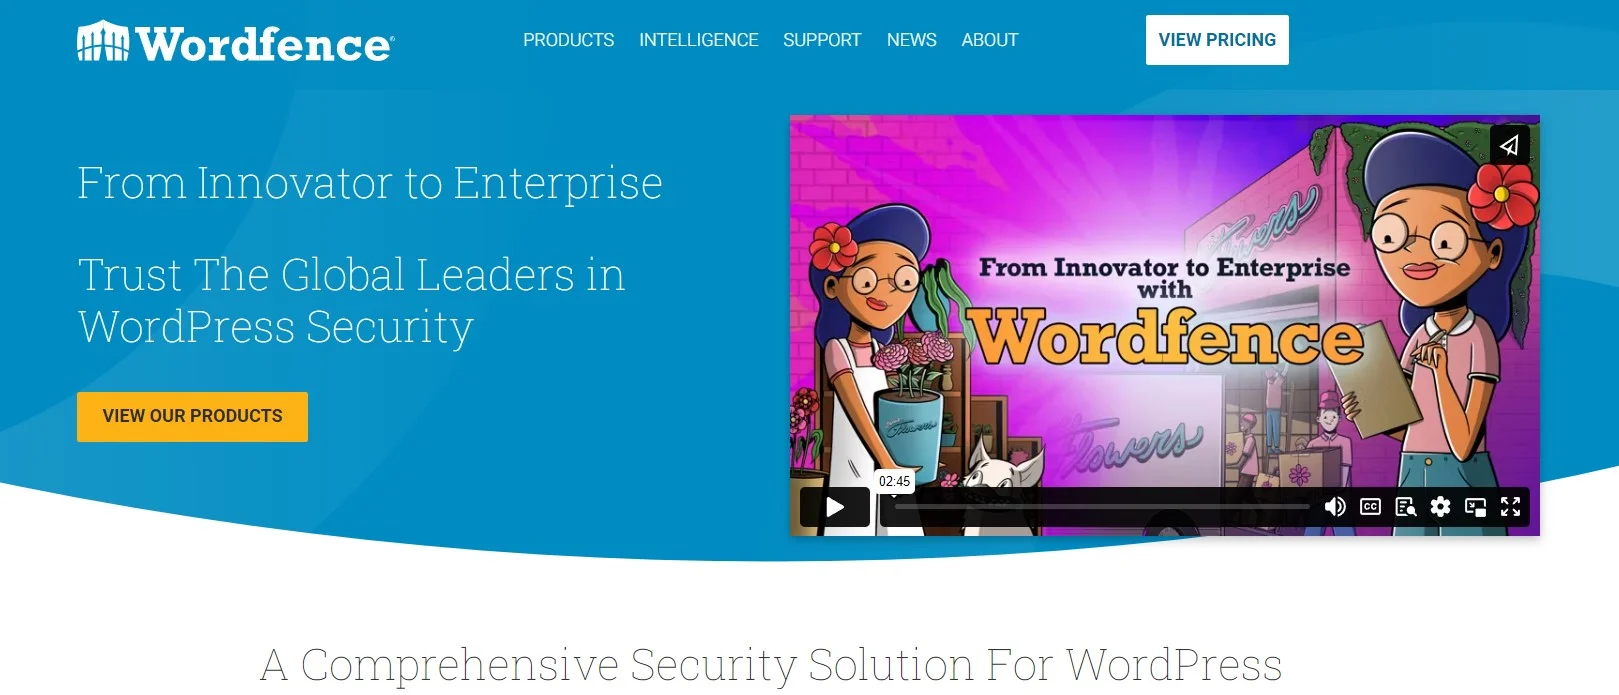 Wordfence Security Plugin Offers An Extensive Range Of Features To Enhance The Security Of Your Wordpress Site